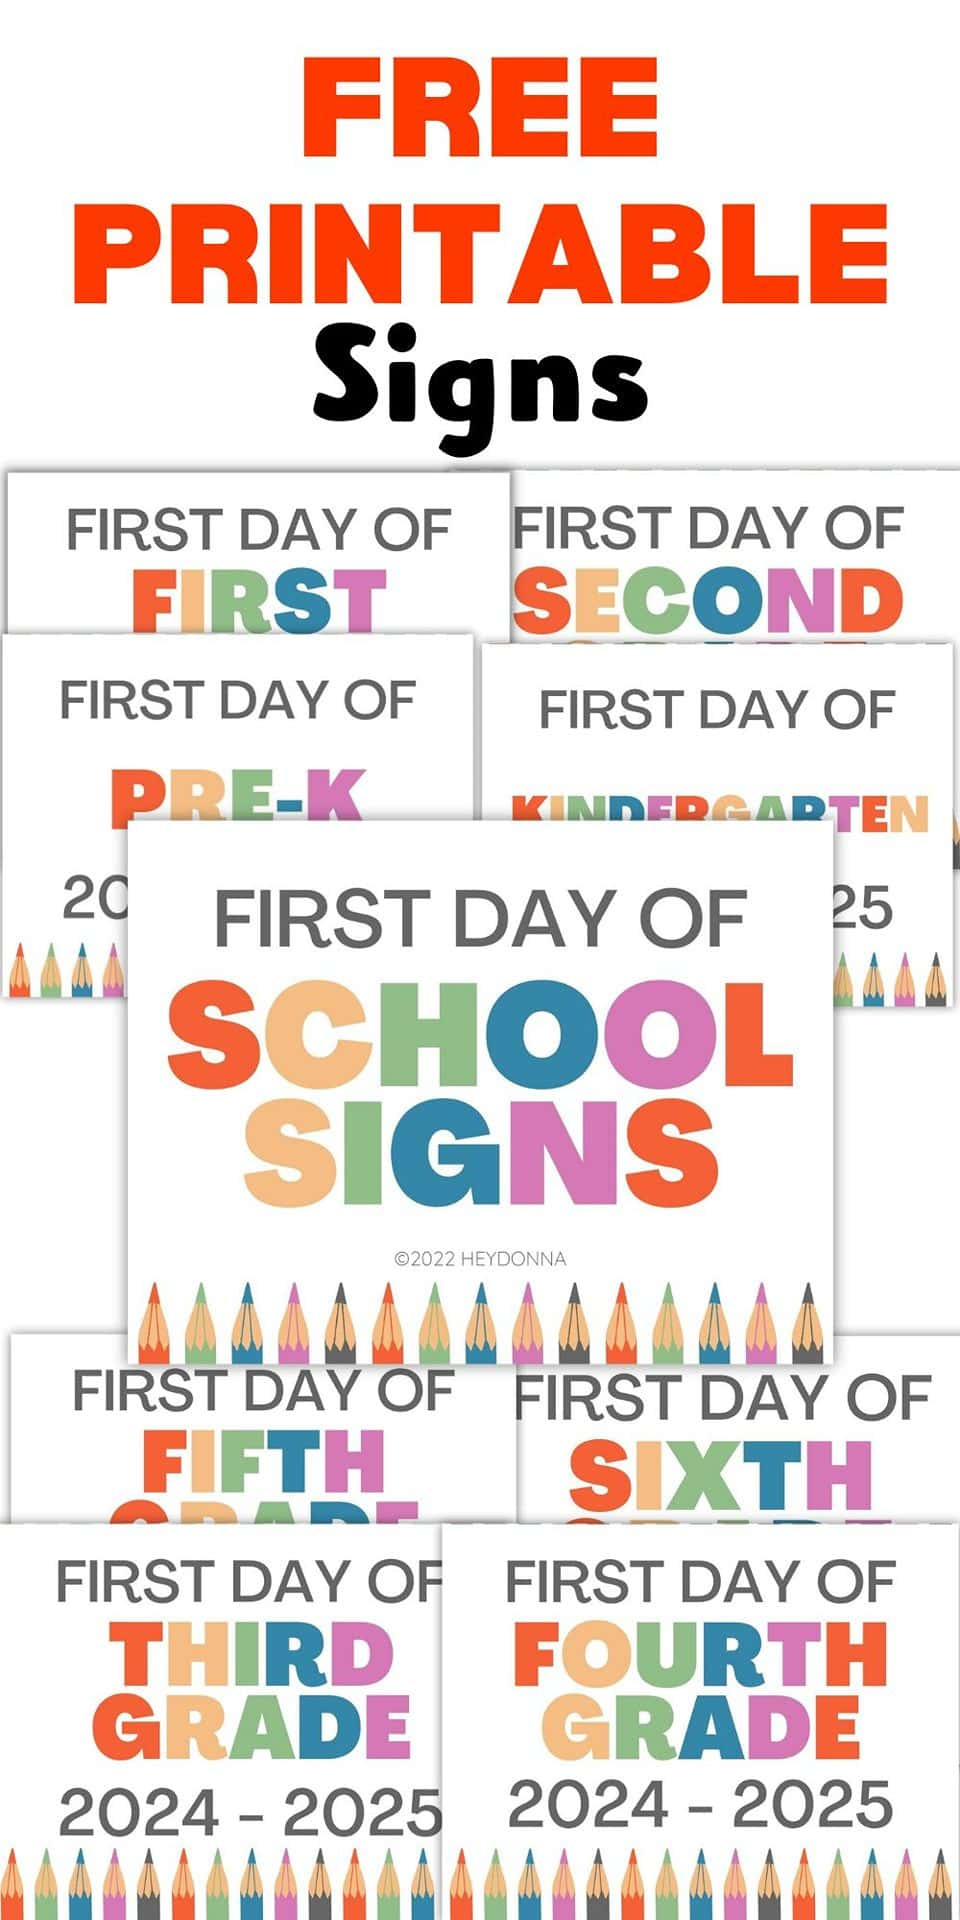 Free Printable First Day Of School Signs [ 2024-2025 ] - Hey Donna intended for Free Printable Back To School Signs 2025